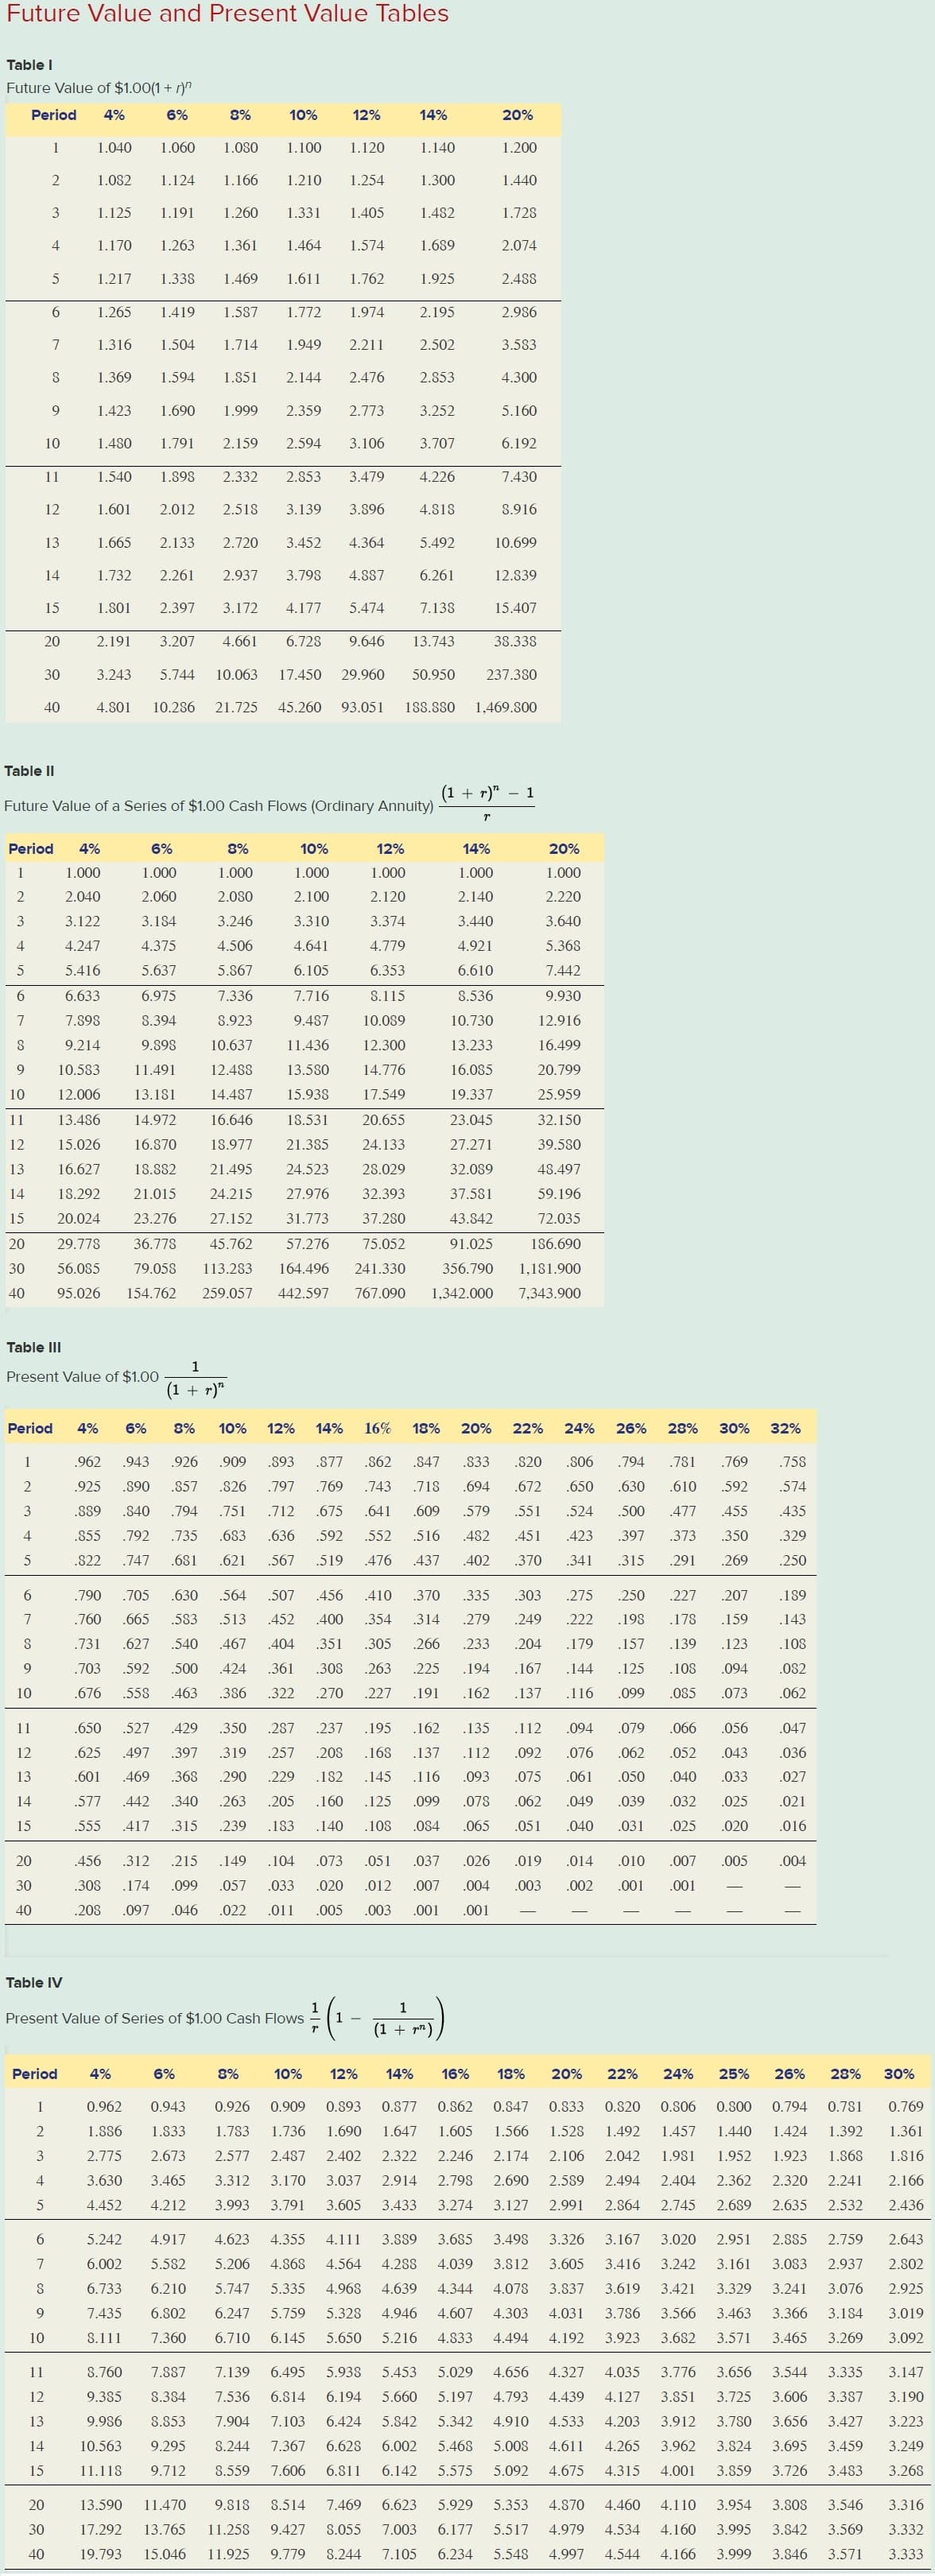 Future Value and Present Value Tables
Table I
Future Value of $1.00(1+r)^
Period
4%
6%
8%
10%
12%
14%
20%
1
1.040
1.060
1.080
1.100
1.120
1.140
1.200
2
1.082
1.124
1.166
1.210
1.254
1.300
1.440
3
1.125
1.191
1.260
1.331
1.405
1.482
1.728
4
1.170
1.263
1.361
1.464
1.574
1.689
2.074
5
1.217
1.338
1.469
1.611
1.762
1.925
2.488
6
1.265
1.419
1.587
1.772
1.974
2.195
2.986
7
1.316 1.504
1.714 1.949
2.211
2.502
3.583
8
1.369
1.594
1.851
2.144
2.476
2.853
4.300
9
1.423
1.690
1.999 2.359
2.773
3.252
5.160
10
1.480
1.791
2.159
2.594
3.106
3.707
6.192
11
1.540
1.898
2.332
2.853
3.479
4.226
7.430
12
1.601 2.012
2.518
3.139
3.896
4.818
8.916
13
1.665
2.133
2.720
3.452
4.364
5.492
10.699
14
1.732
2.261
2.937 3.798
4.887
6.261
12.839
15
1.801
2.397
3.172 4.177
5.474
7.138
15.407
20
30
3.243
5.744
40
40
4.801
2.191 3.207 4.661 6.728 9.646 13.743
10.063 17.450 29.960
10.286 21.725 45.260 93.051 188.880 1,469.800
38.338
50.950
237.380
Table II
Future Value of a Series of $1.00 Cash Flows (Ordinary Annuity)
(1 + r)n - 1
r
Period 4%
6%
8%
10%
12%
14%
20%
1
1.000
1.000
1.000
1.000
1.000
1.000
1.000
2
2.040
2.060
2.080
2.100
2.120
2.140
2.220
3
3.122
3.184
3.246
3.310
3.374
3.440
3.640
4
4.247
4.375
4.506
4.641
4.779
4.921
5.368
5
5.416
5.637
5.867
6.105
6.353
6.610
7.442
6
6.633
6.975
7.336
7.716
8.115
8.536
9.930
7
7.898
8.394
8.923
9.487
10.089
10.730
12.916
8
9.214
9.898
10.637
11.436
12.300
13.233
16.499
9
10.583
11.491
12.488
13.580
14.776
16.085
20.799
10
12.006
13.181
14.487
15.938
17.549
19.337
25.959
11
13.486
14.972
16.646
18.531
20.655
23.045
32.150
12
15.026
16.870
18.977
21.385
24.133
27.271
39.580
13
16.627
18.882
21.495
24.523
28.029
32.089
48.497
14
18.292
21.015
24.215
27.976
32.393
37.581
59.196
15
20.024
23.276
27.152
31.773
37.280
43.842
72.035
20
29.778
36.778
57.276
75.052
30
40
56.085 79.058
95.026 154.762
45.762
91.025
113.283 164.496 241.330 356.790 1,181.900
259.057 442.597 767.090 1,342.000 7,343.900
186.690
Table III
1
Present Value of $1.00
(1 + r)"
Period 4% 6% 8% 10% 12% 14%
16% 18% 20% 22% 24%
26% 28% 30% 32%
1
2
3
4
5
.822 .747 .681 .621 .567 .519 .476 .437
.962 .943 .926 .909 .893 .877 .862 .847 .833 .820 .806
.781 .769
.925 .890 .857 .826 .797 .769 .743 .718 .694 .672 .650 .630 .610 .592
.889 .840 .794 .751 .712 .675 .641 .609 .579 .551 .524 .500 .477 .455
.855 .792 .735 .683 .636 .592 .552 .516 .482 .451 .423 .397 .373 .350
.402 .370 .341 .315 .291 .269
.794
.758
.574
.435
.329
.250
671 o
8
.731
9
10
.676 .558 .463 .386 .322 .270 .227 .191 .162 .137 .116 .099 .085
.790 .705 .630 .564 .507 .456 .410 .370 .335 .303 .275
.760 .665 .583 .513 .452 .400 .354 .314 .279 .249 .222
.627 .540 .467 .404 .351 .305 .266 .233 .204 .179
.703 .592 .500 .424 .361 .308 .263 .225 .194 .167 .144 .125 .108 .094
.073
.250 .227 .207 .189
.198 .178 .159 .143
.157 .139 .123 .108
.082
.062
11
12
13
14
15
.145 .116
.577 .442 .340 .263 .205 .160 .125 .099
.555 .417 .315 .239 .183 .140 .108 .084
.650 .527 .429 .350 .287 .237 .195 .162 .135 .112 .094 .079 .066 .056 .047
.625 .497 .397 .319 .257 .208 .168 .137 .112 .092 .076 .062 .052 .043 .036
.601 .469 .368 .290 .229 .182
.093 .075 .061 .050 .040 .033 .027
.078 .062 .049 .039 .032 .025 .021
.065 .051 .040 .031 .025
.020 .016
20
30
40
.456 .312 .215 .149 .104 .073 .051 .037 .026 .019
.308 .174 .099 .057 .033 .020 .012 .007 .004 .003
.208 .097 .046 .022 .011 .005 .003 .001 .001
.014 .010 .007
.002 .001 .001
.005
.004
Table IV
Present Value of Series of $1.00 Cash Flows
1½ ( 1
(1
1
(1 pm)
Period 4%
6%
8%
10% 12% 14% 16% 18% 20% 22% 24% 25% 26% 28% 30%
1
2
3
4
5
3.630 3.465
4.452 4.212
0.962 0.943 0.926 0.909 0.893 0.877
1.886 1.833 1.783 1.736 1.690 1.647
2.775 2.673 2.577 2.487 2.402 2.322
3.312 3.170 3.037
3.993 3.791 3.605
0.862 0.847 0.833 0.820 0.806 0.800 0.794 0.781
3.433 3.274 3.127 2.991
0.769
1.605 1.566 1.528 1.492 1.457 1.440 1.424 1.392 1.361
2.246 2.174 2.106 2.042 1.981 1.952 1.923 1.868 1.816
2.914 2.798 2.690 2.589 2.494 2.404 2.362 2.320 2.241 2.166
2.864 2.745 2.689 2.635 2.532 2.436
6
5.242 4.917 4.623
7
8
6.733 6.210
5.747 5.335 4.968 4.639
9
10
8.111
4.344 4.078 3.837 3.619
7.435 6.802 6.247 5.759 5.328 4.946 4.607 4.303 4.031 3.786
7.360 6.710 6.145 5.650 5.216 4.833 4.494 4.192 3.923
4.355 4.111 3.889 3.685 3.498 3.326 3.167 3.020 2.951 2.885 2.759 2.643
6.002 5.582 5.206 4.868 4.564 4.288 4.039 3.812 3.605 3.416 3.242 3.161 3.083 2.937 2.802
3.421 3.329 3.241 3.076 2.925
3.566 3.463 3.366 3.184 3.019
3.682 3.571 3.465 3.269 3.092
11
12
13
14
15
155
11.118
20
30
40
8.760 7.887 7.139 6.495 5.938 5.453 5.029 4.656 4.327 4.035 3.776 3.656 3.544 3.335 3.147
9.385 8.384 7.536 6.814 6.194 5.660 5.197 4.793 4.439 4.127 3.851 3.725 3.606 3.387
9.986 8.853 7.904 7.103 6.424 5.842 5.342 4.910 4.533 4.203 3.912 3.780 3.656 3.427
10.563 9.295 8.244 7.367 6.628 6.002 5.468 5.008 4.611 4.265 3.962 3.824 3.695 3.459
3.249
9.712 8.559 7.606 6.811 6.142 5.575 5.092 4.675 4.315 4.001 3.859 3.726 3.483 3.268
13.590 11.470 9.818 8.514 7.469 6.623 5.929 5.353 4.870 4.460 4.110 3.954 3.808 3.546 3.316
17.292 13.765 11.258 9.427 8.055 7.003
6.177 5.517 4.979 4.534 4.160 3.995 3.842 3.569 3.332
19.793 15.046 11.925 9.779 8.244 7.105 6.234 5.548 4.997 4.544 4.166 3.999 3.846 3.571 3.333
3.190
3.223